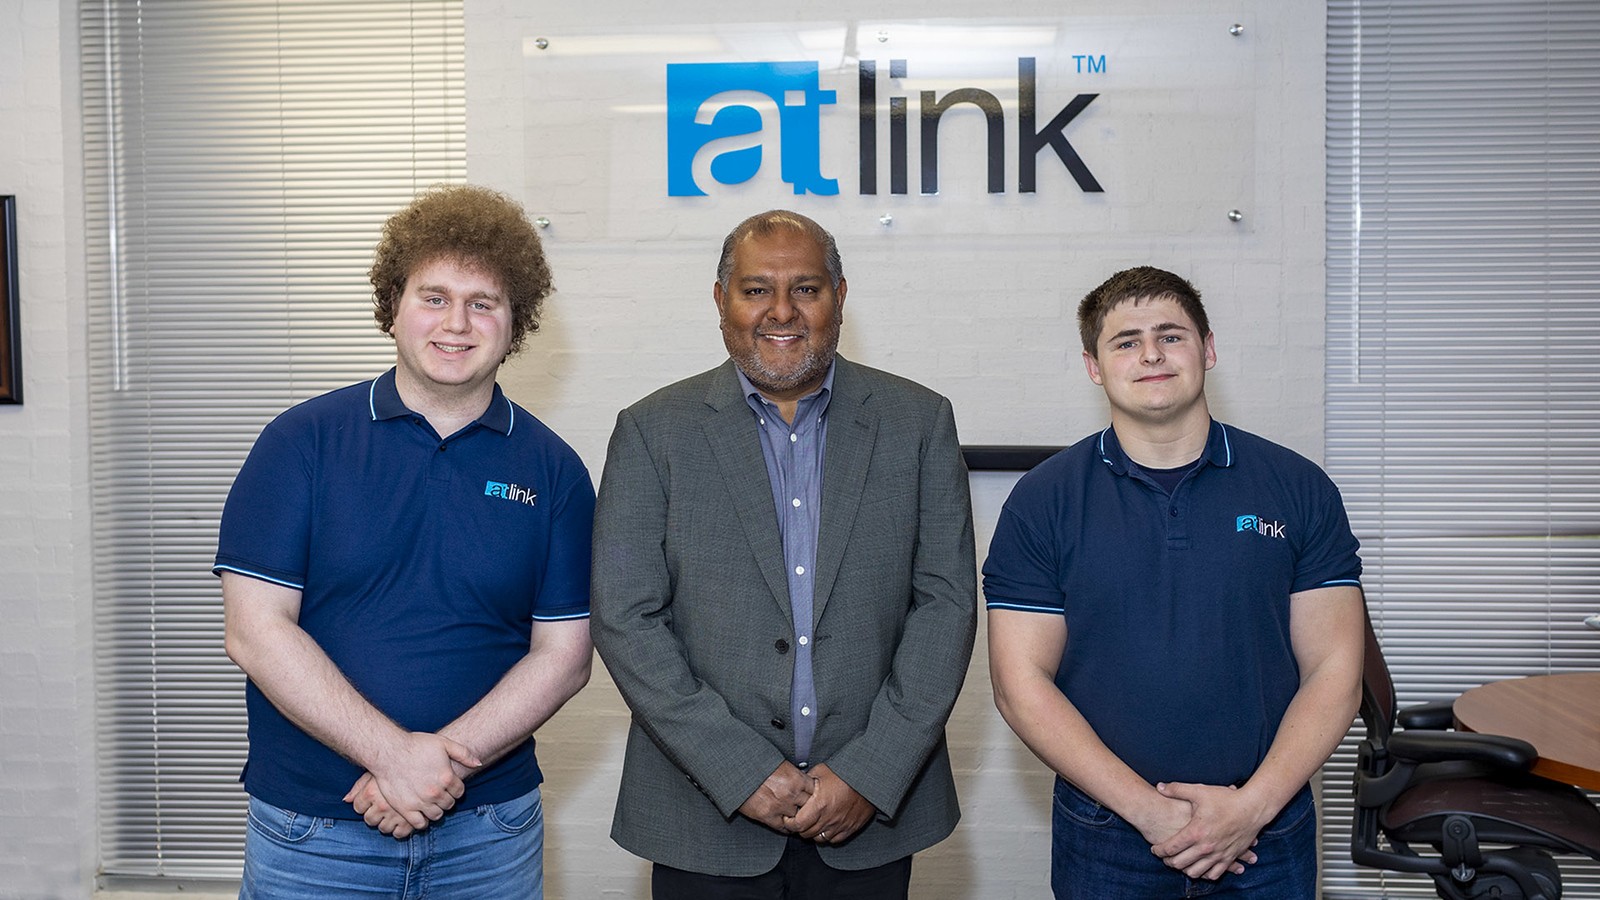  UHCL alumnus Dilhar De Silva, center, offers hands-on experience and training to upcoming IT specialists like Ryan Brooker, left, and Joseph Bittinger